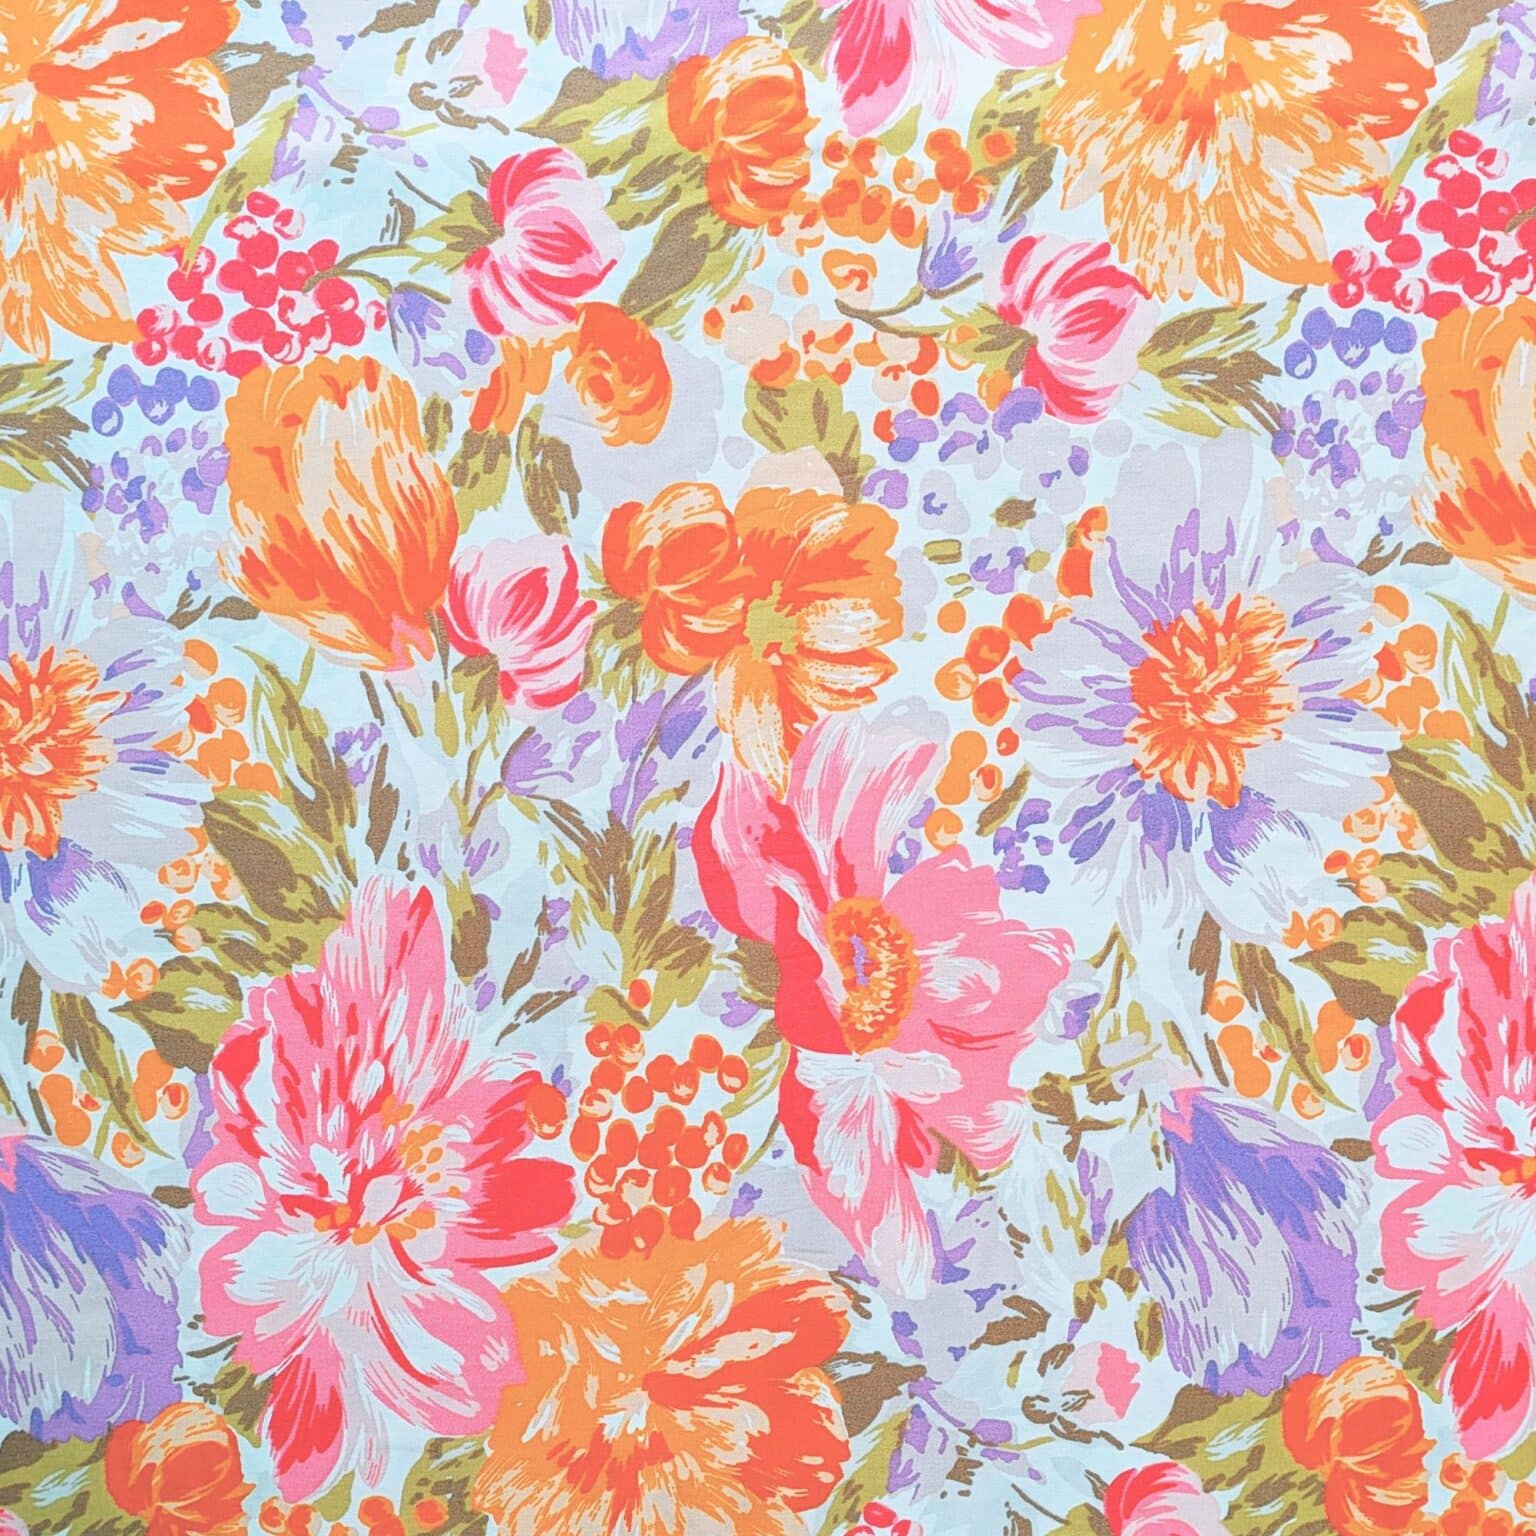 Cotton Poplin Fabric - Pink And Orange Floral - 145cm Wide | More Sewing